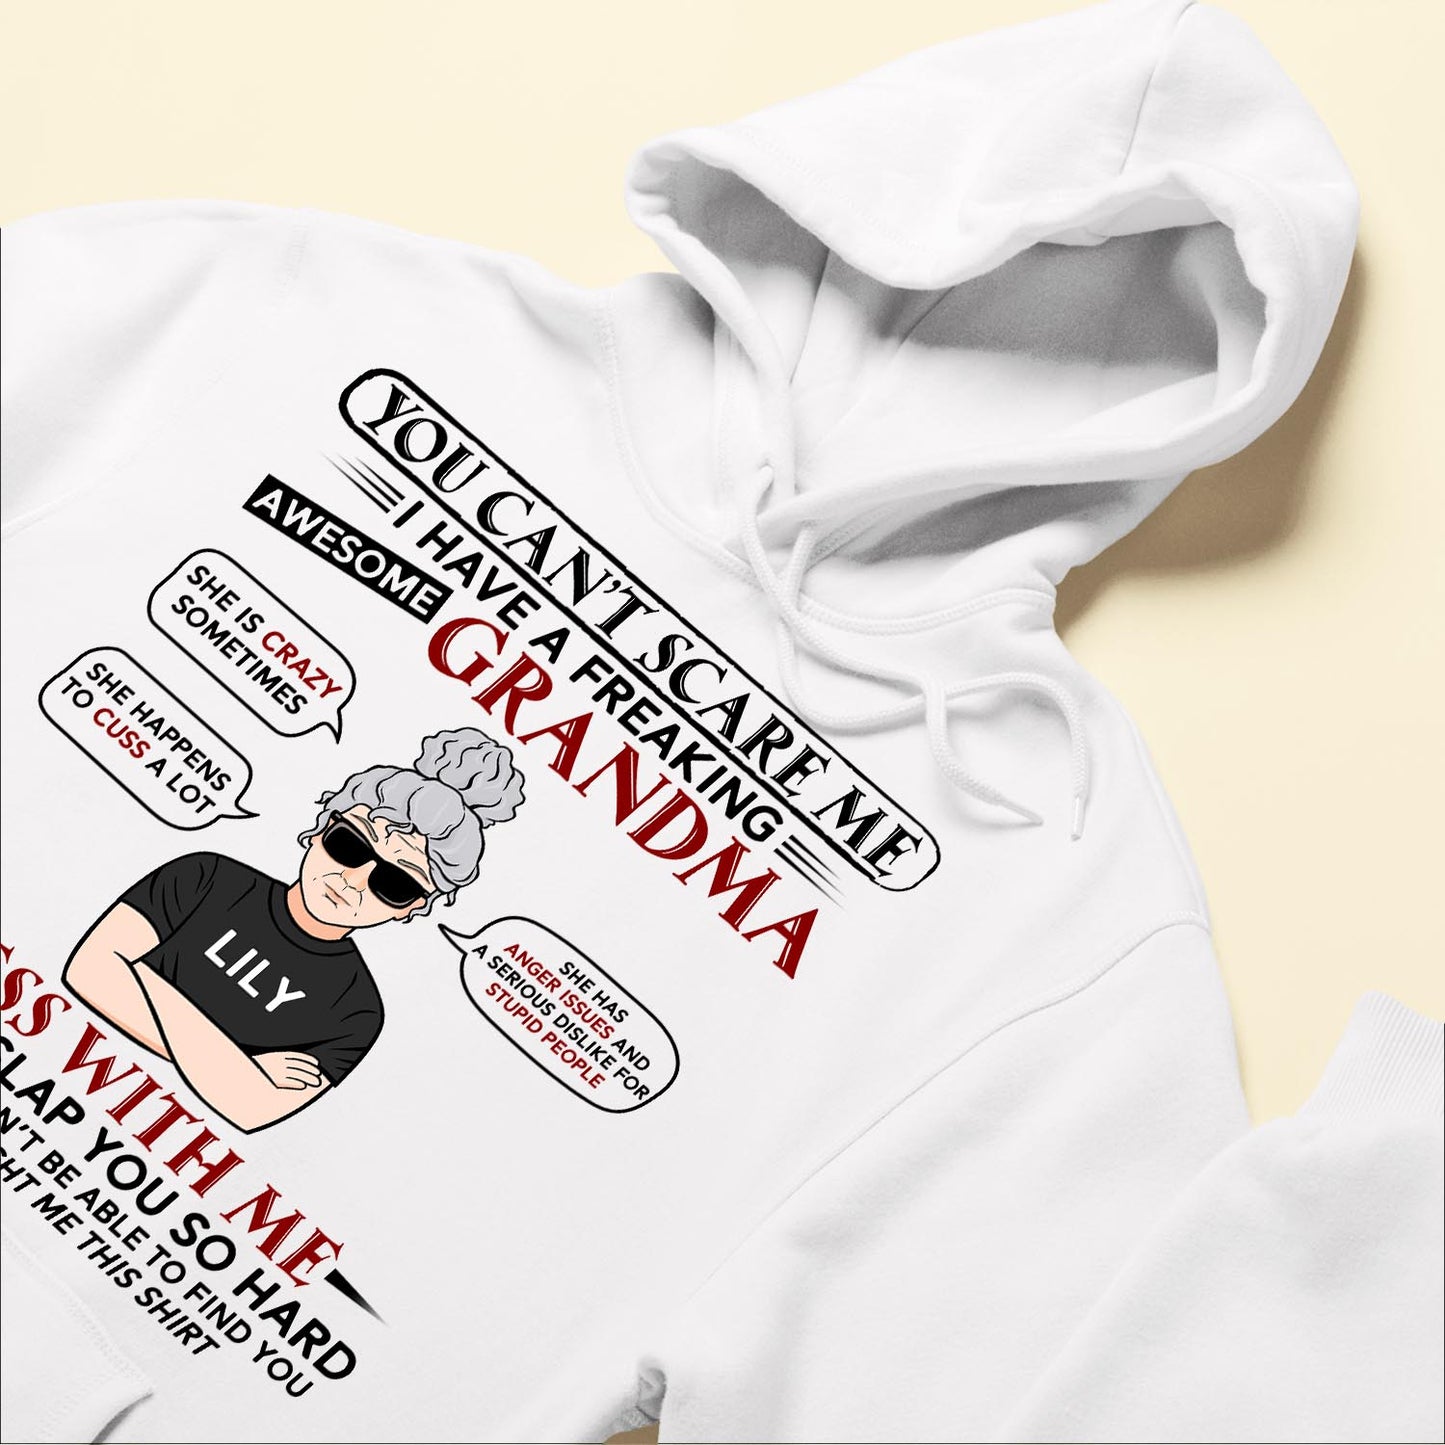 I Have A Freaking Awesome Grandma - Personalized Shirt - Birthday, Back To School Gift For Grandkids, Grandchildren, GrandSon, Granddaughter